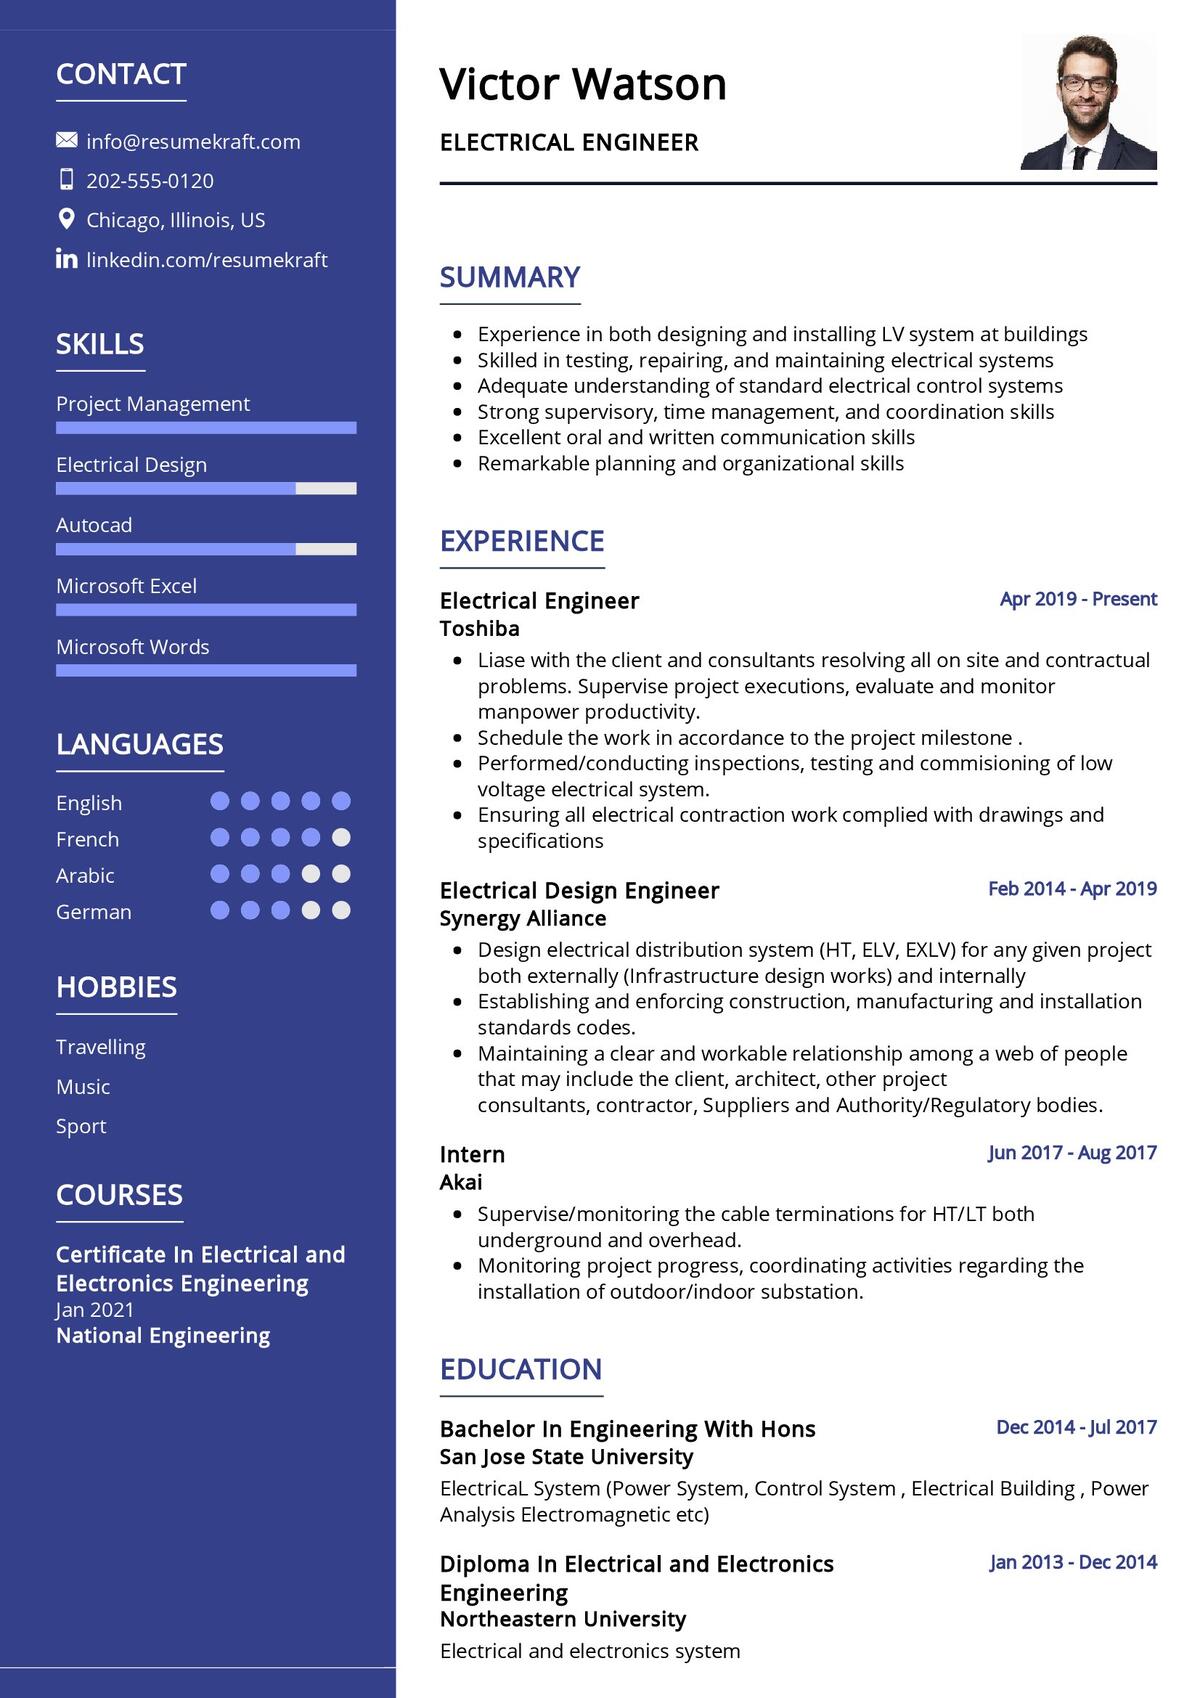 Electrical Engineer Cv Template Free Download - Printable Templates